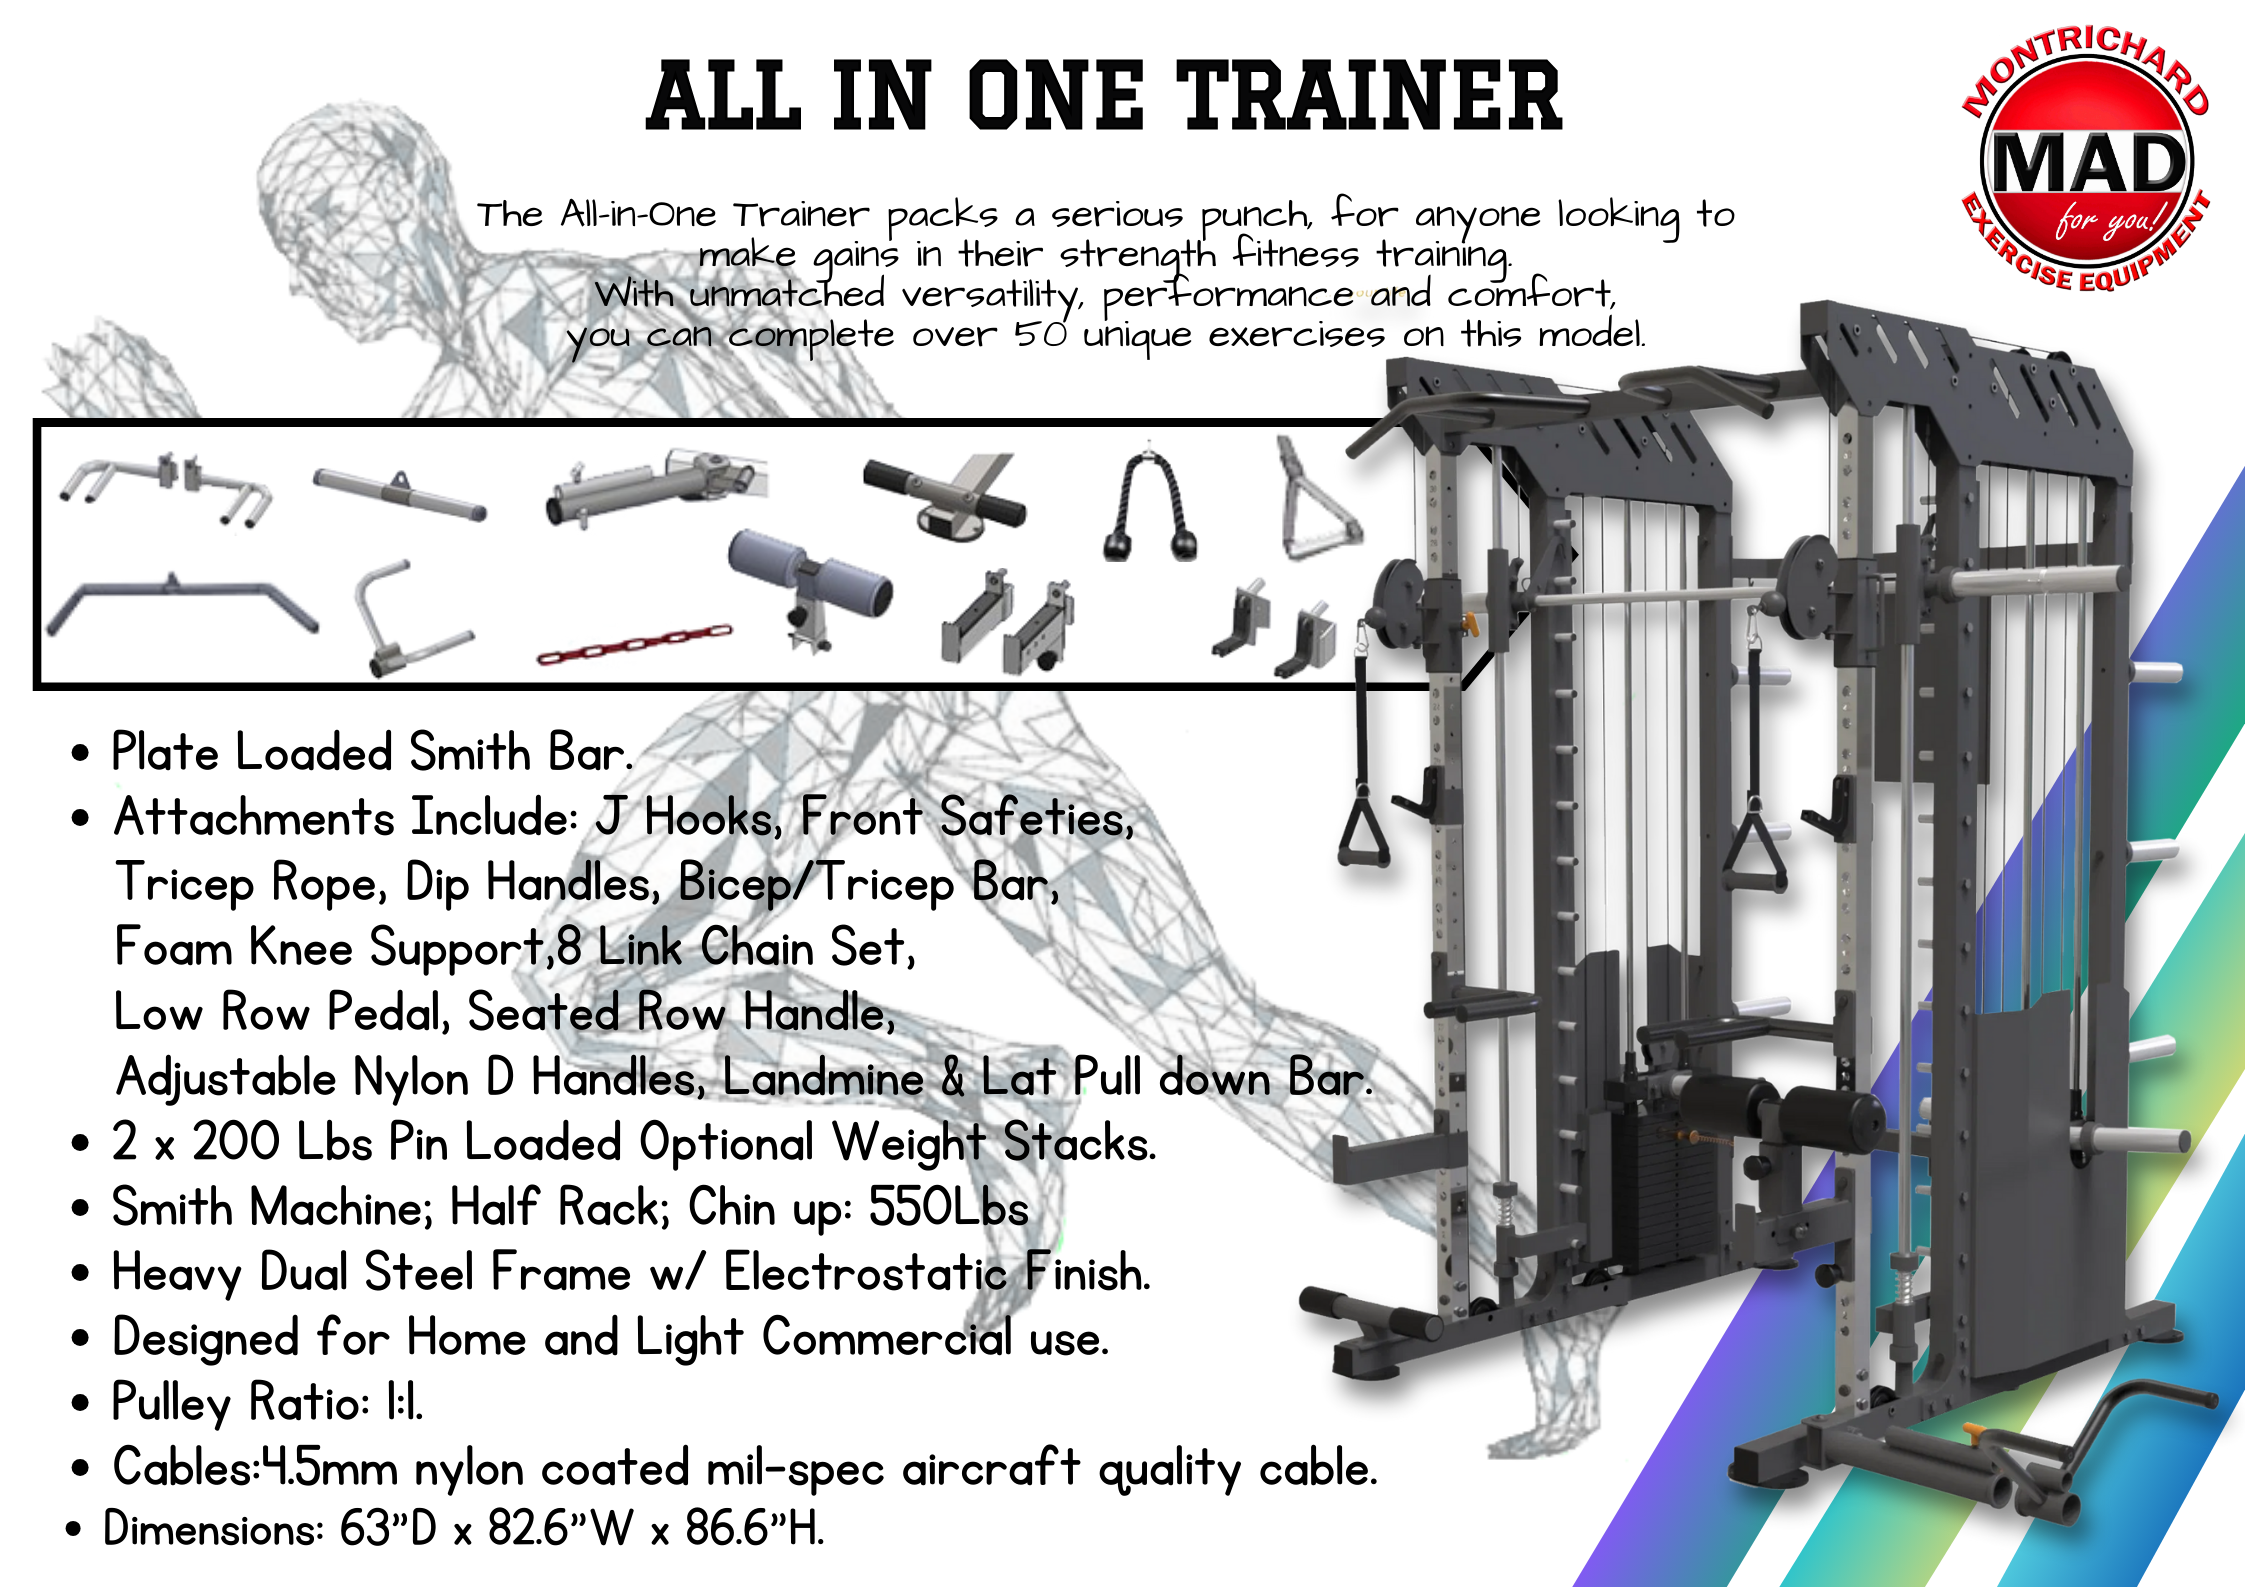 All in One Trainer